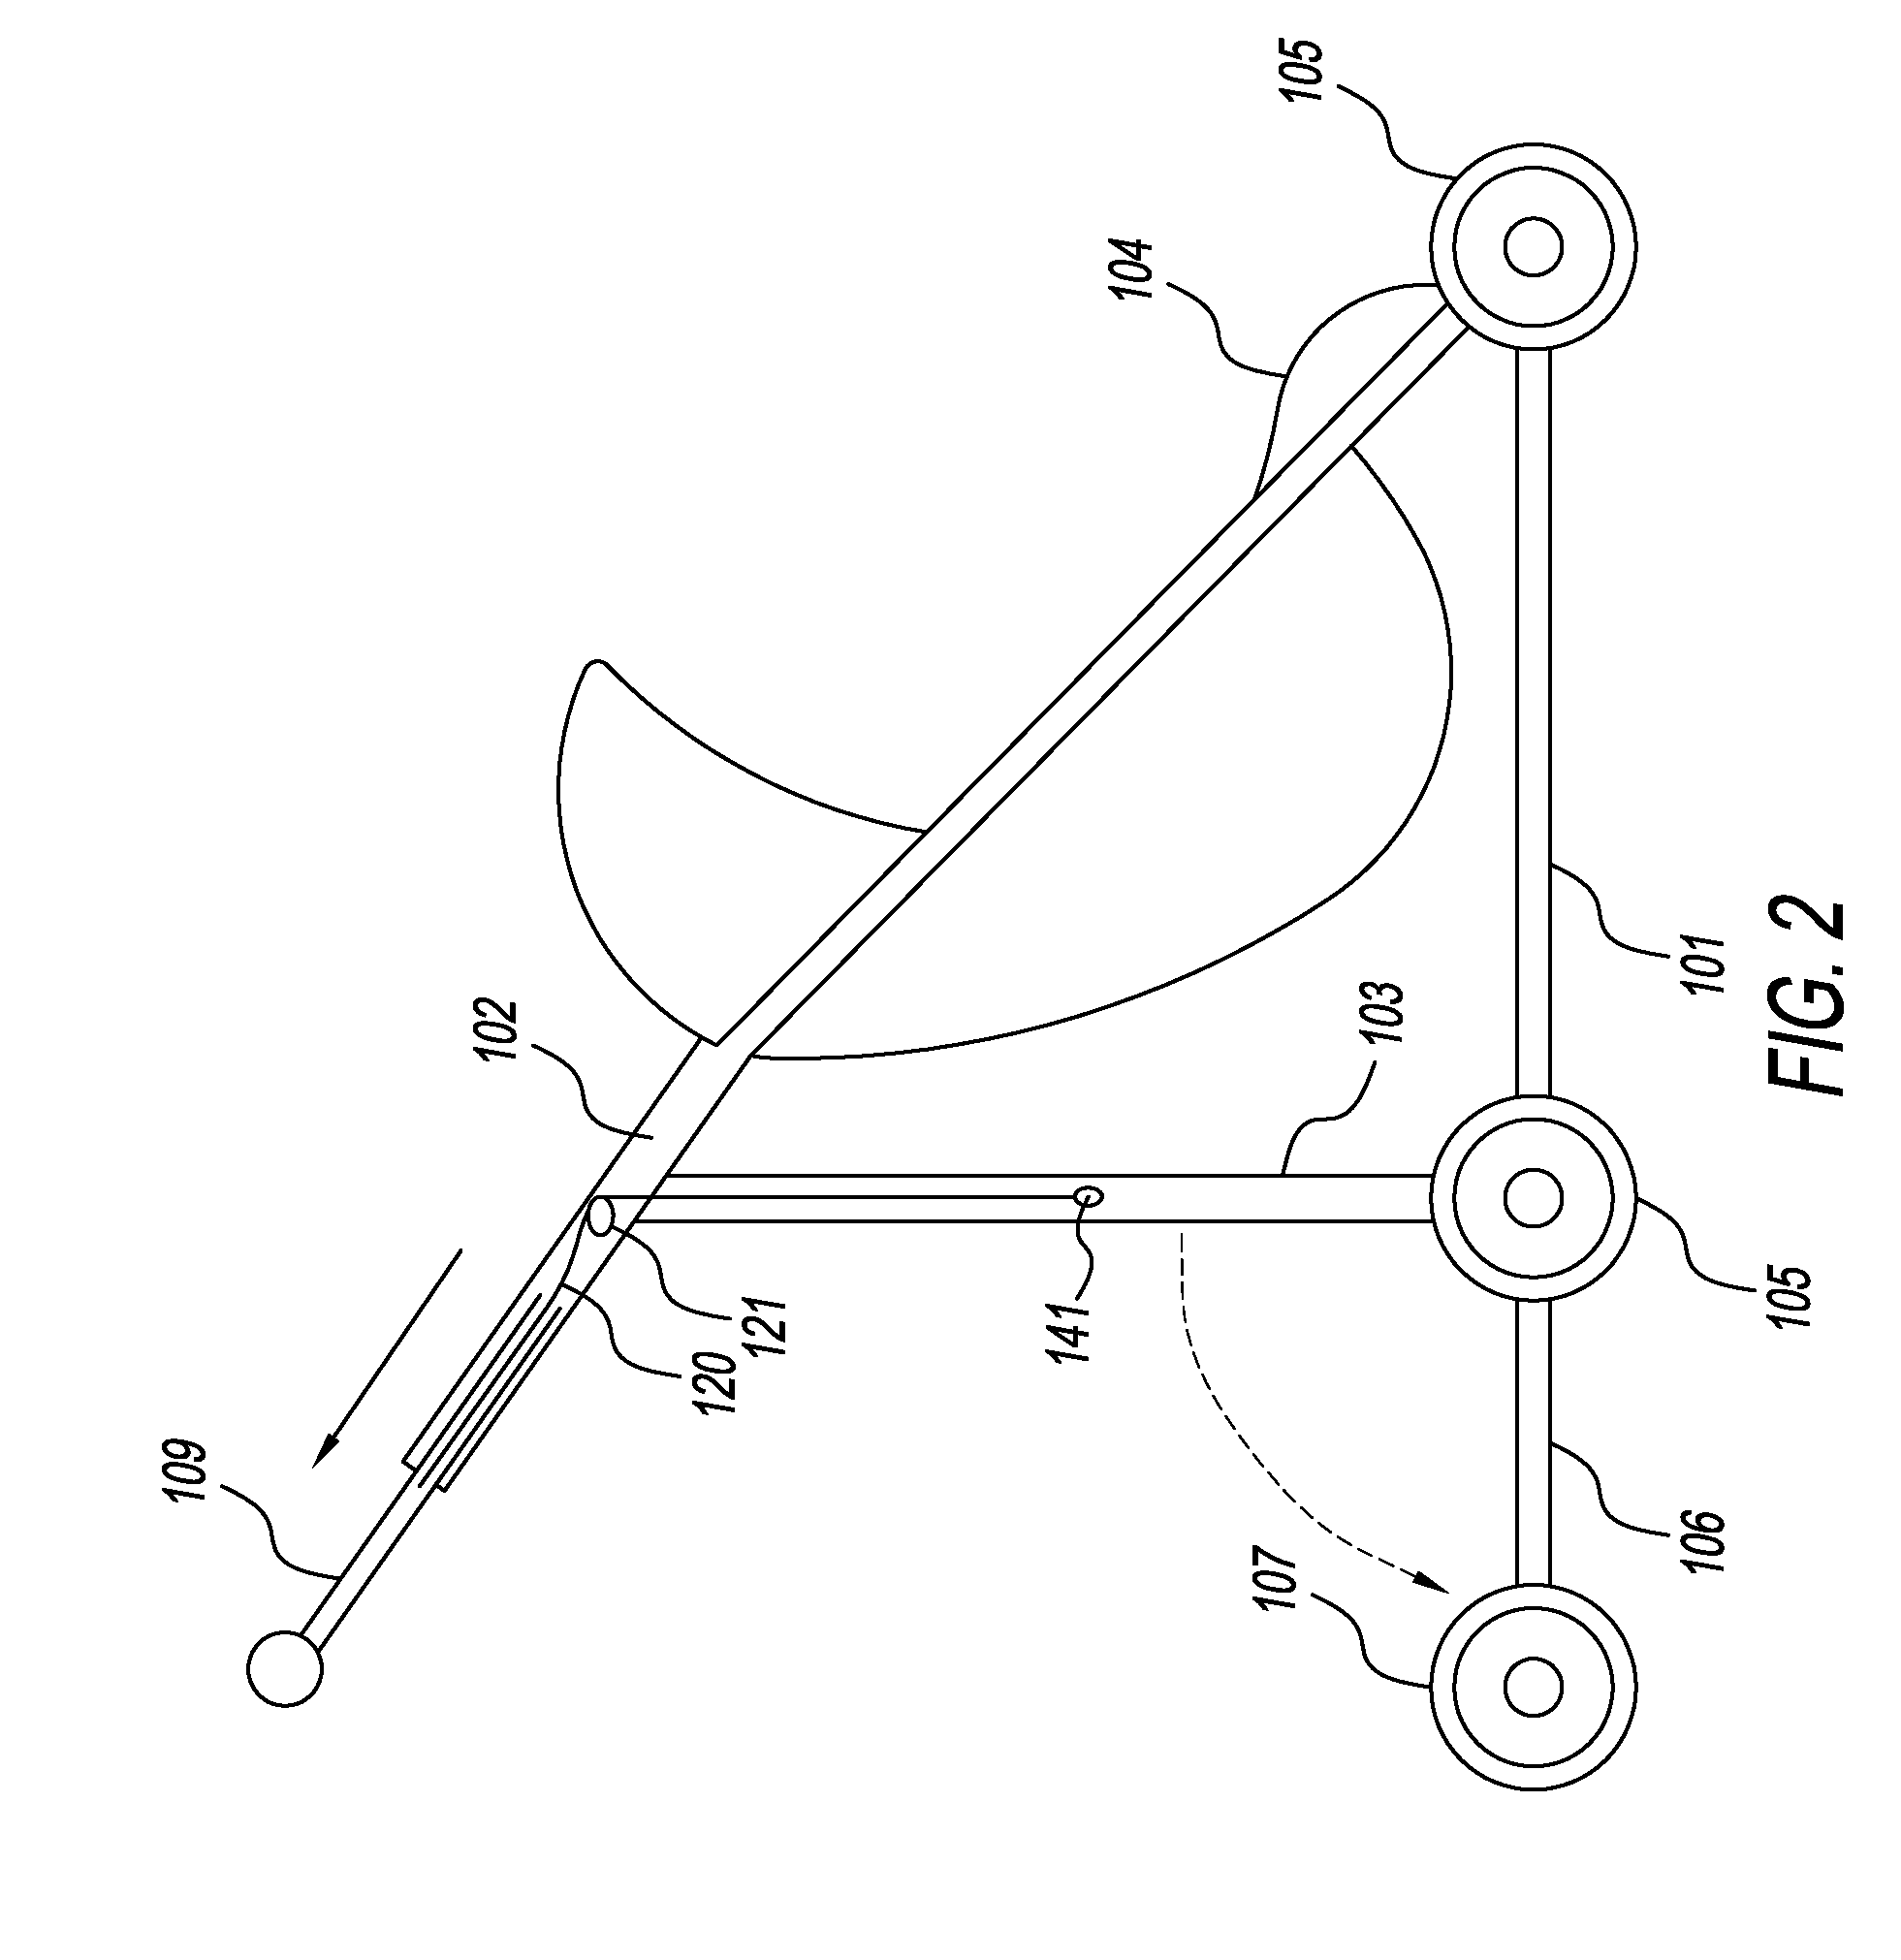 Stroller with telescopic and locking members